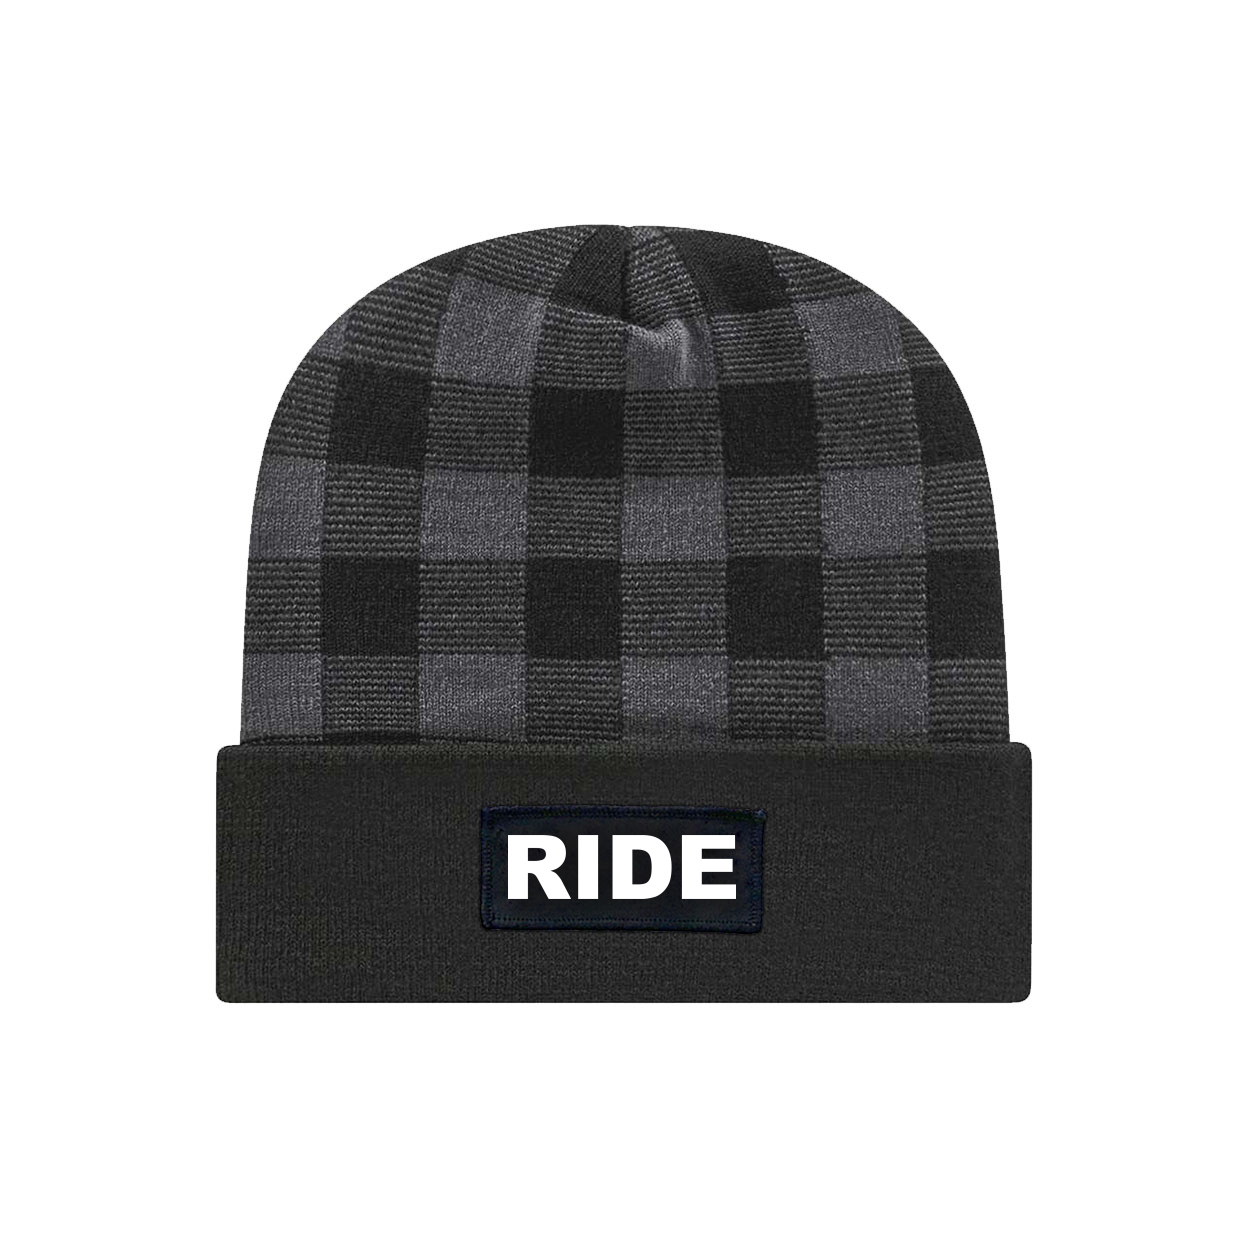 Ride Brand Logo Night Out Woven Patch Roll Up Plaid Beanie Black/Heather Gray